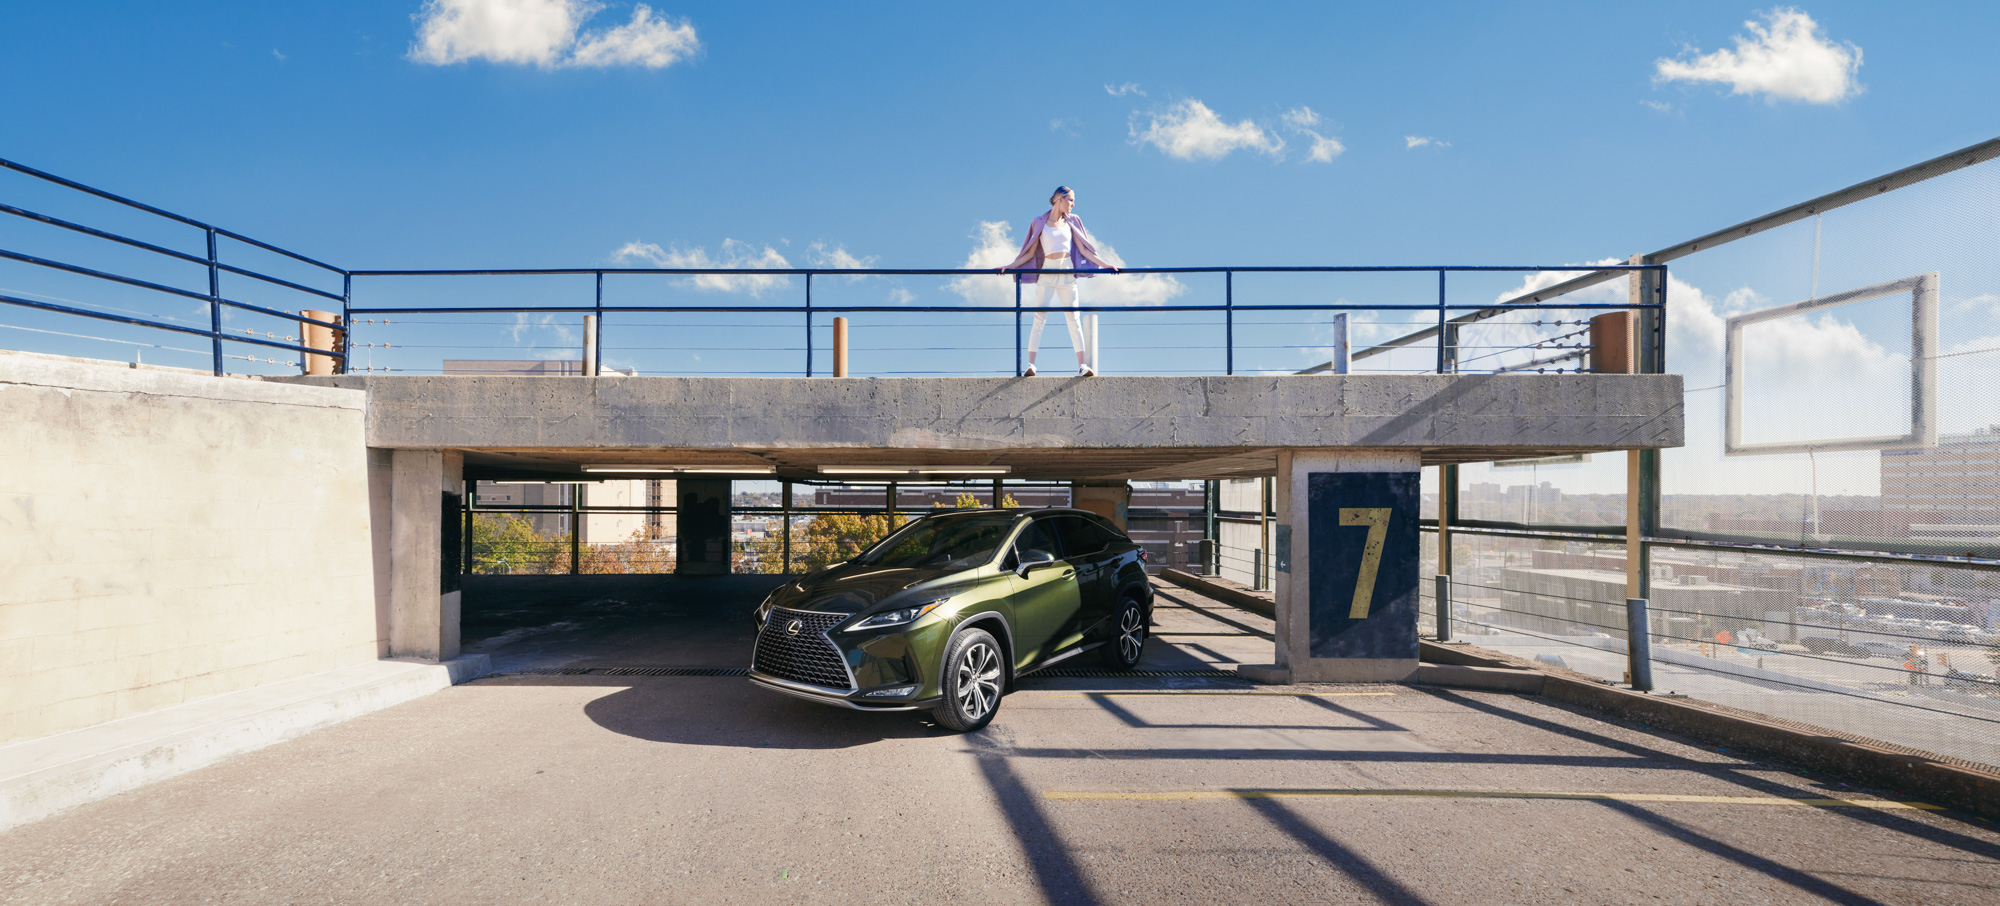 lexus rx car photography commercial editorial caleb kuhl director building advertising lifestyle panorama garage